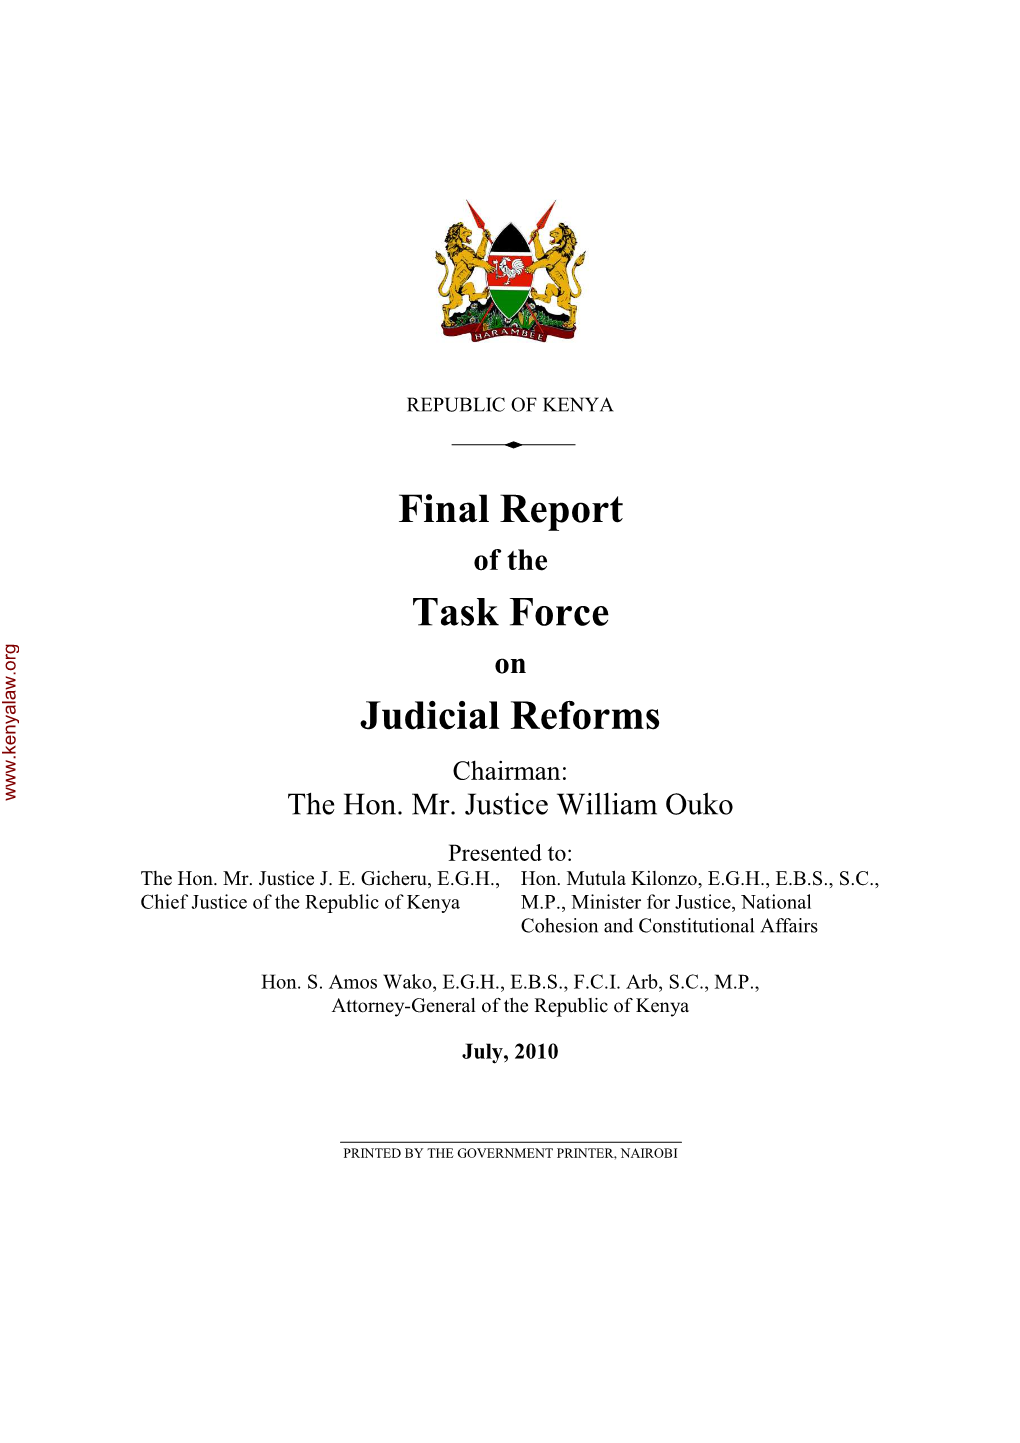 Final Report of the Task Force on Judicial Reforms Chairman: the Hon